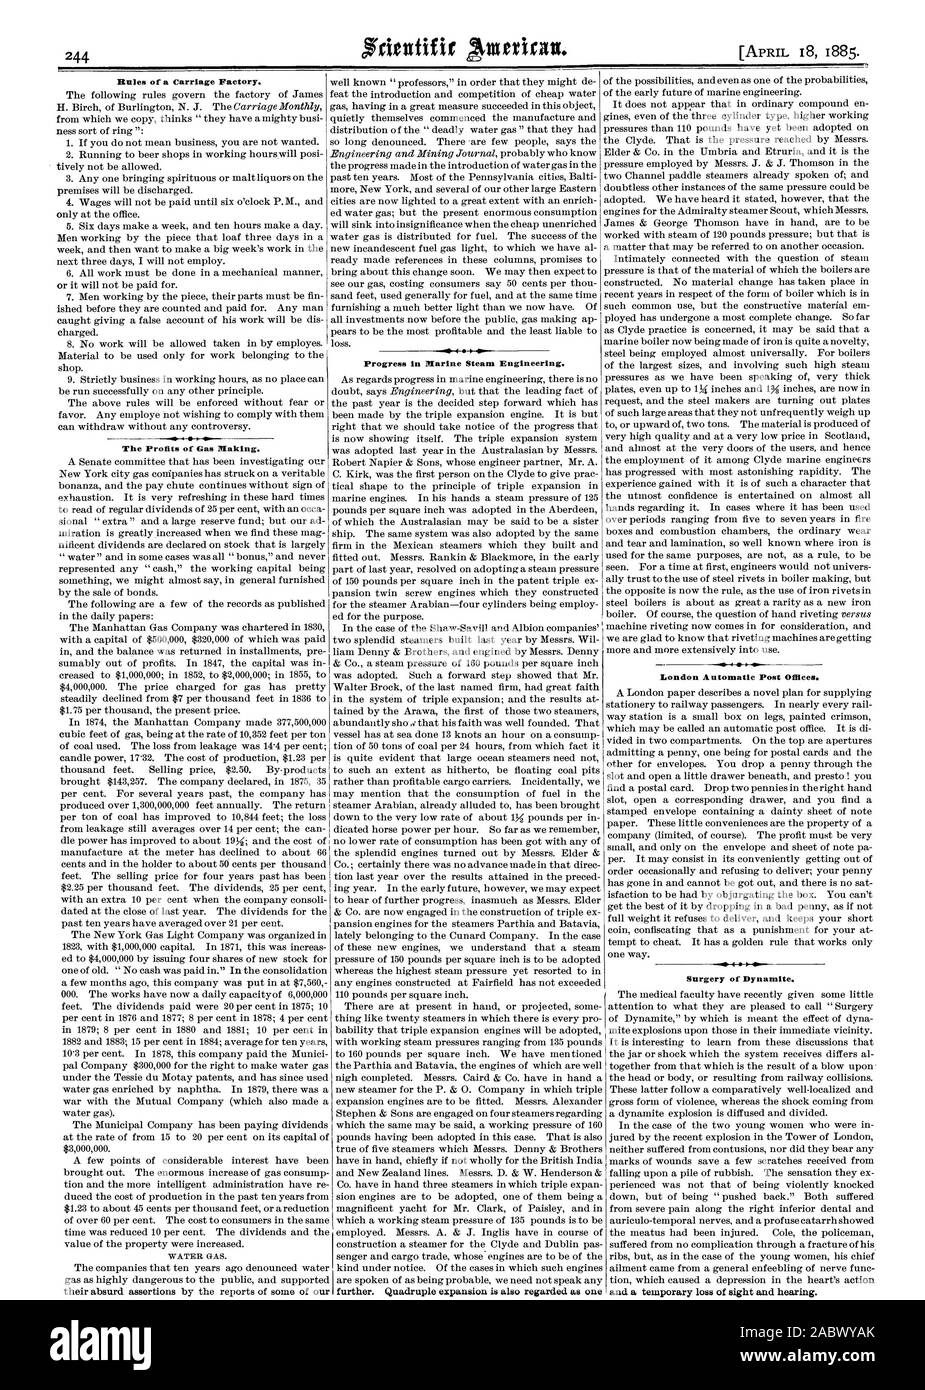 dentine Rules of a Carriage Factory. The Profits of Gas Making. Progress in Marine Steam Engineering. further. Quadruple expansion is also regarded as one London Automatic Post Offices. 4 Surgery of Dynamite. and a temporary loss of sight and hearing., scientific american, 1885-04-18 Stock Photo